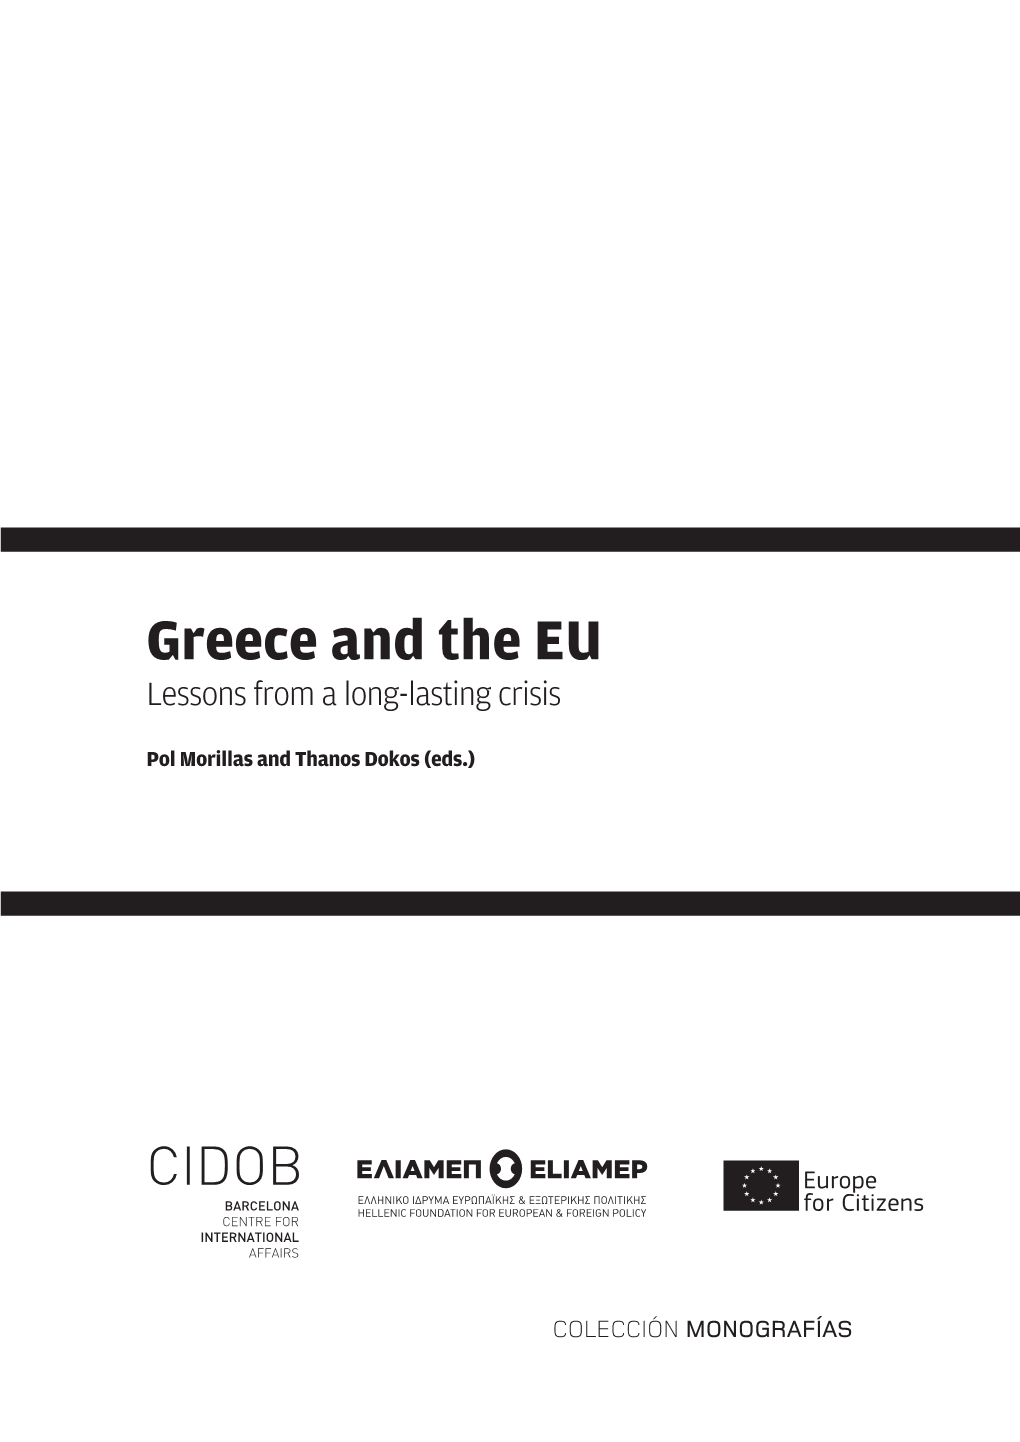 Greece and the EU Lessons from a Long-Lasting Crisis